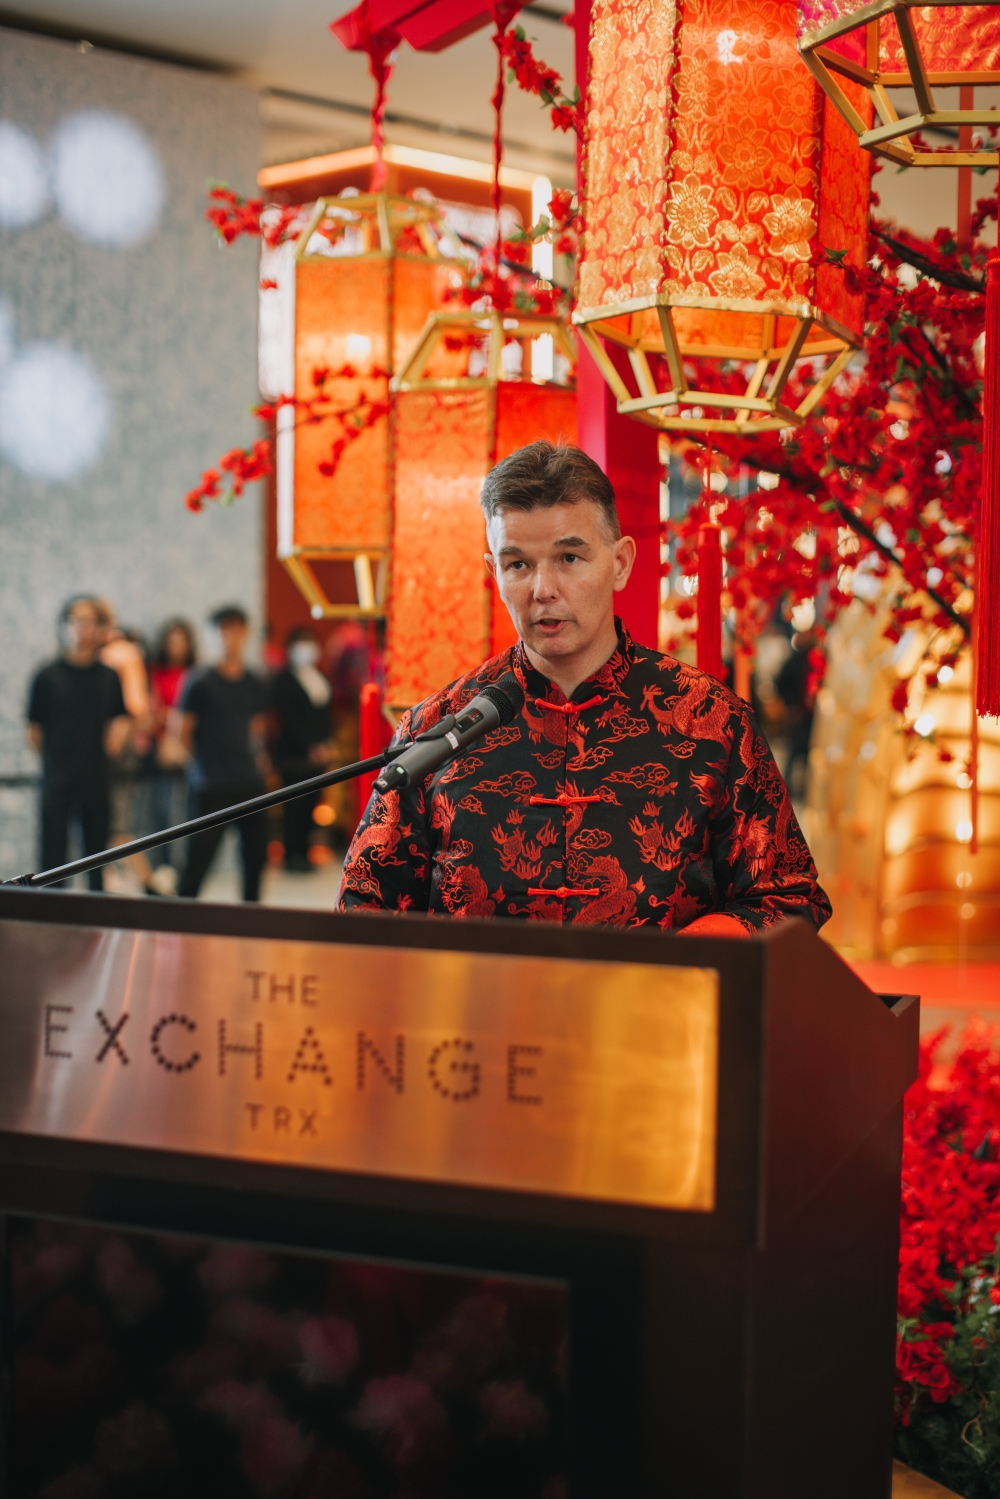 The Exchange TRX general manager Trevor Hill said the avenue inspires to become a cultural hub, drawing inspirations from the ‘Silk Story’. — Picture courtesy of The Exchange TRX